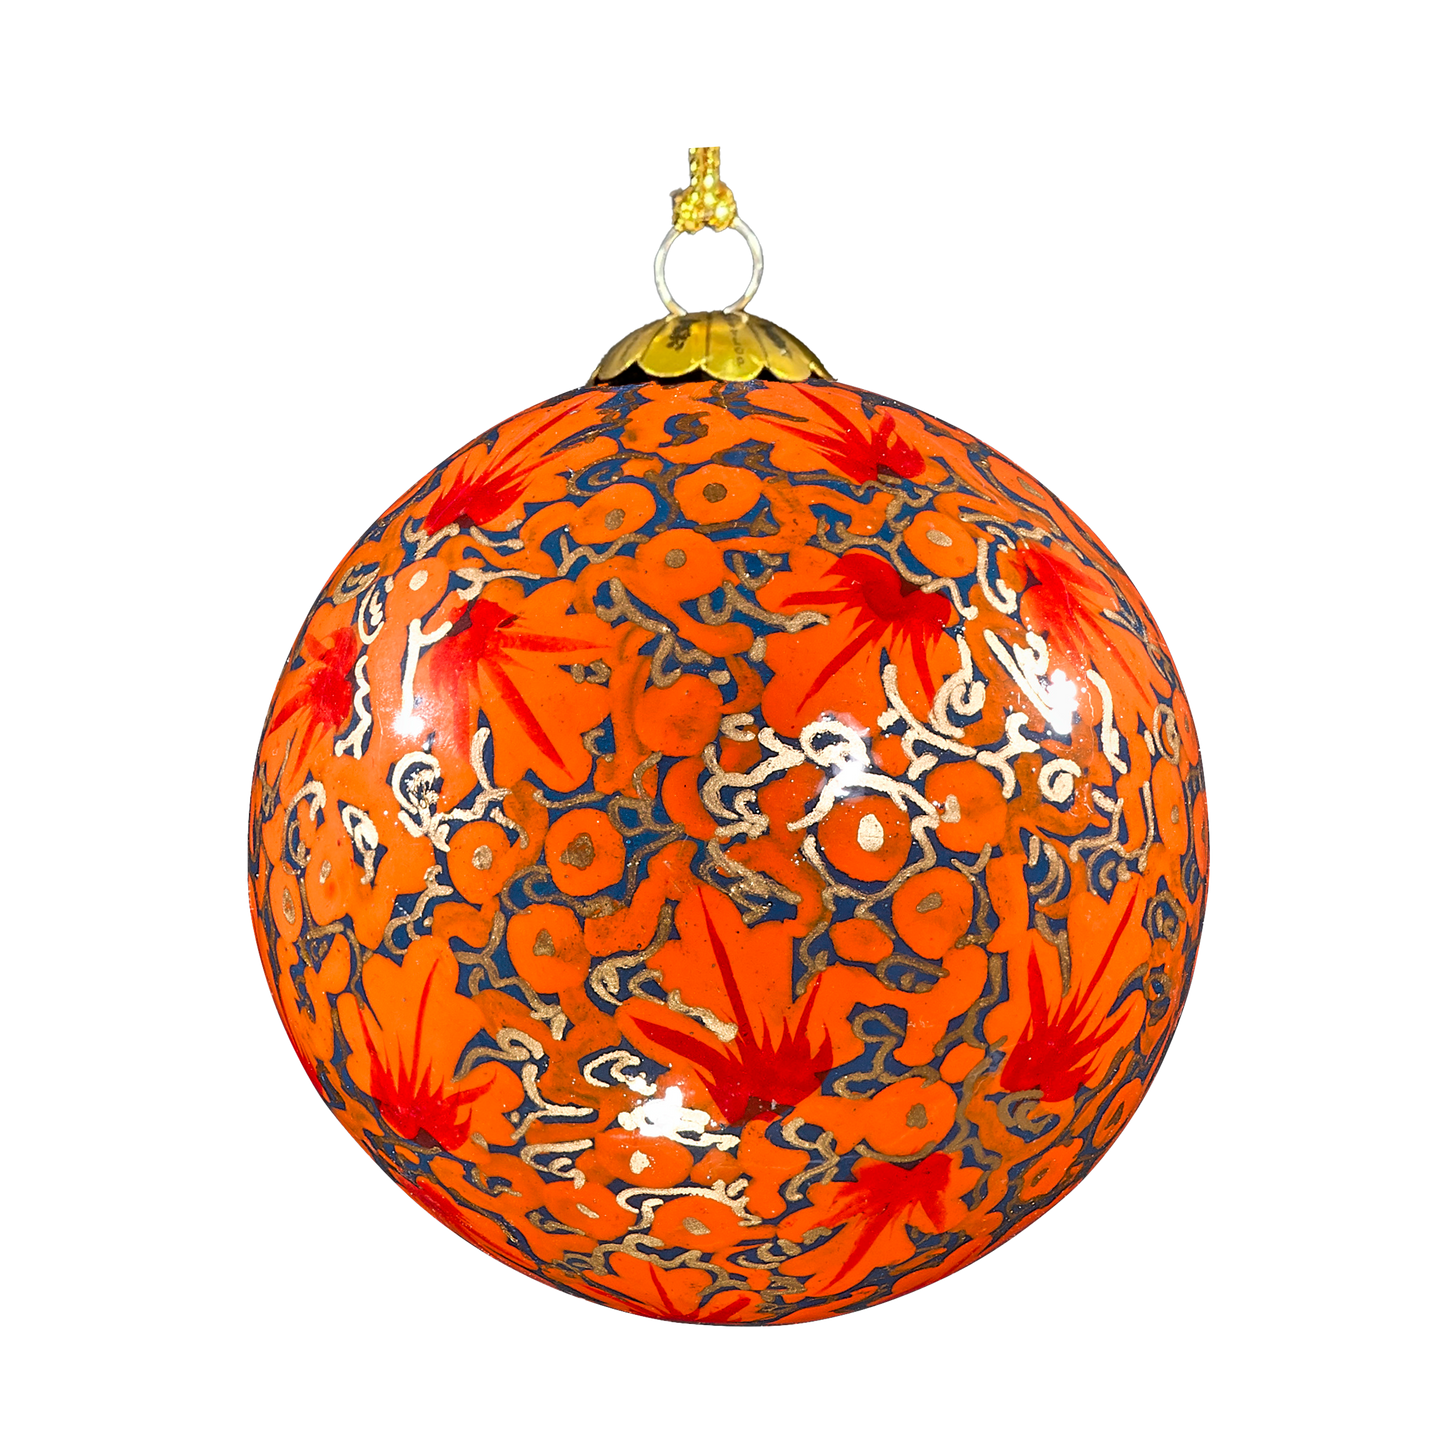 Orange Christmas Bauble for Christmas tree decorations